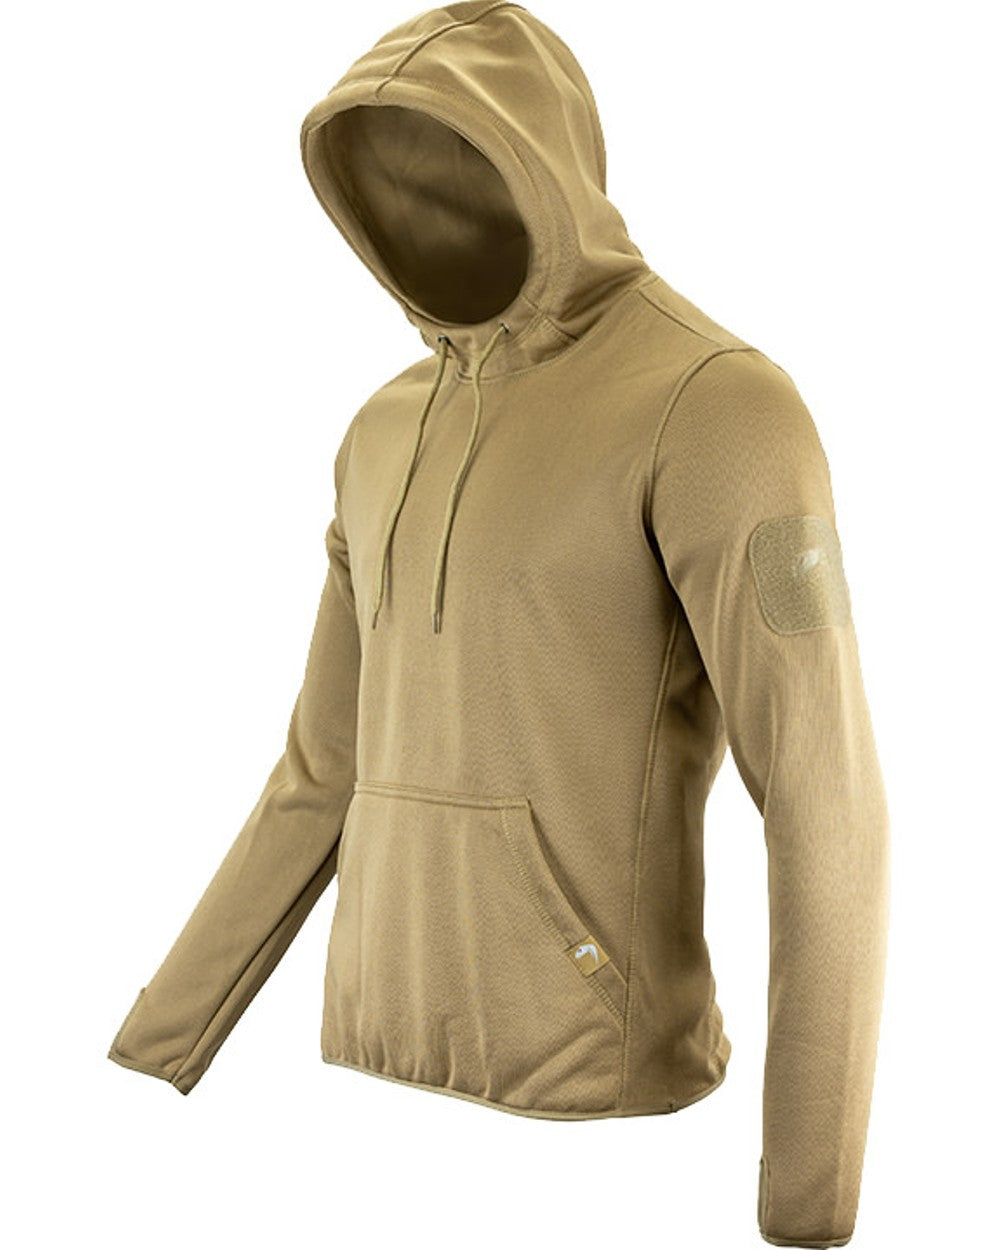 Viper Armour Hoodie in Coyote 